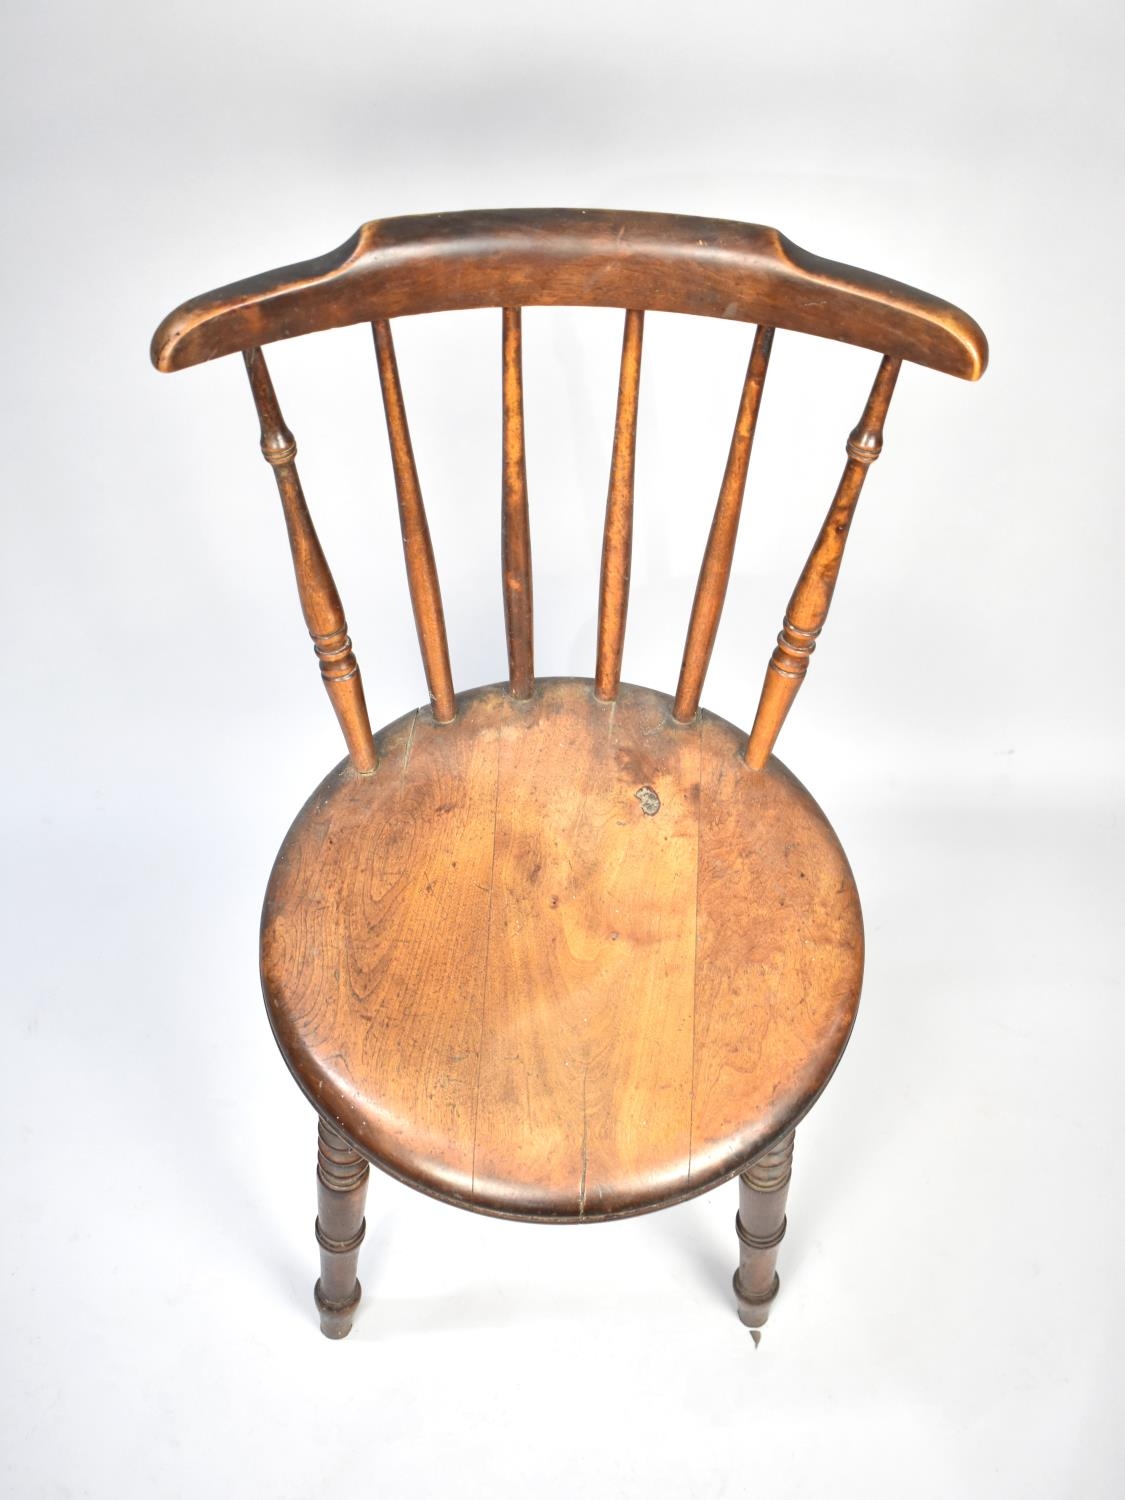 A Circular Seated Spindle Back Vintage Side Chair - Image 2 of 2